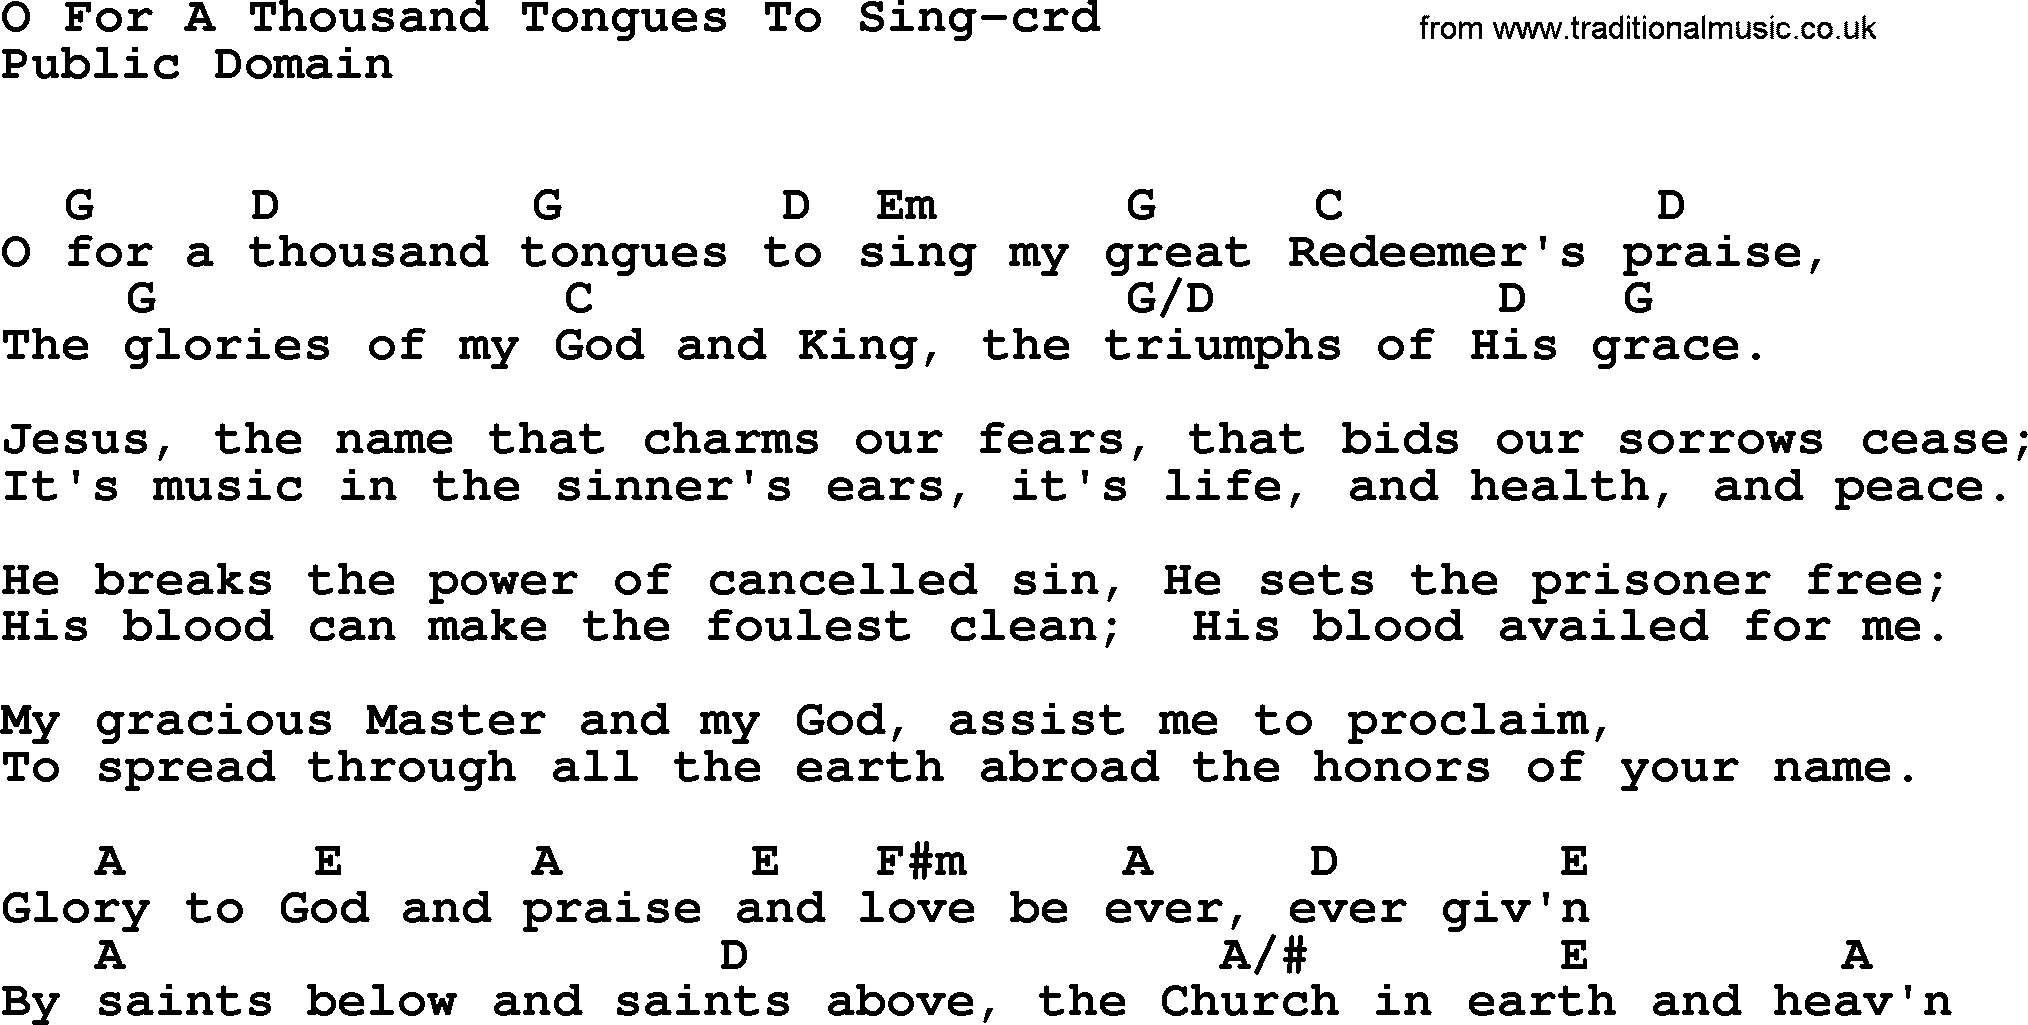 Top 500 Hymn: O For A Thousand Tongues To Sing, lyrics and chords